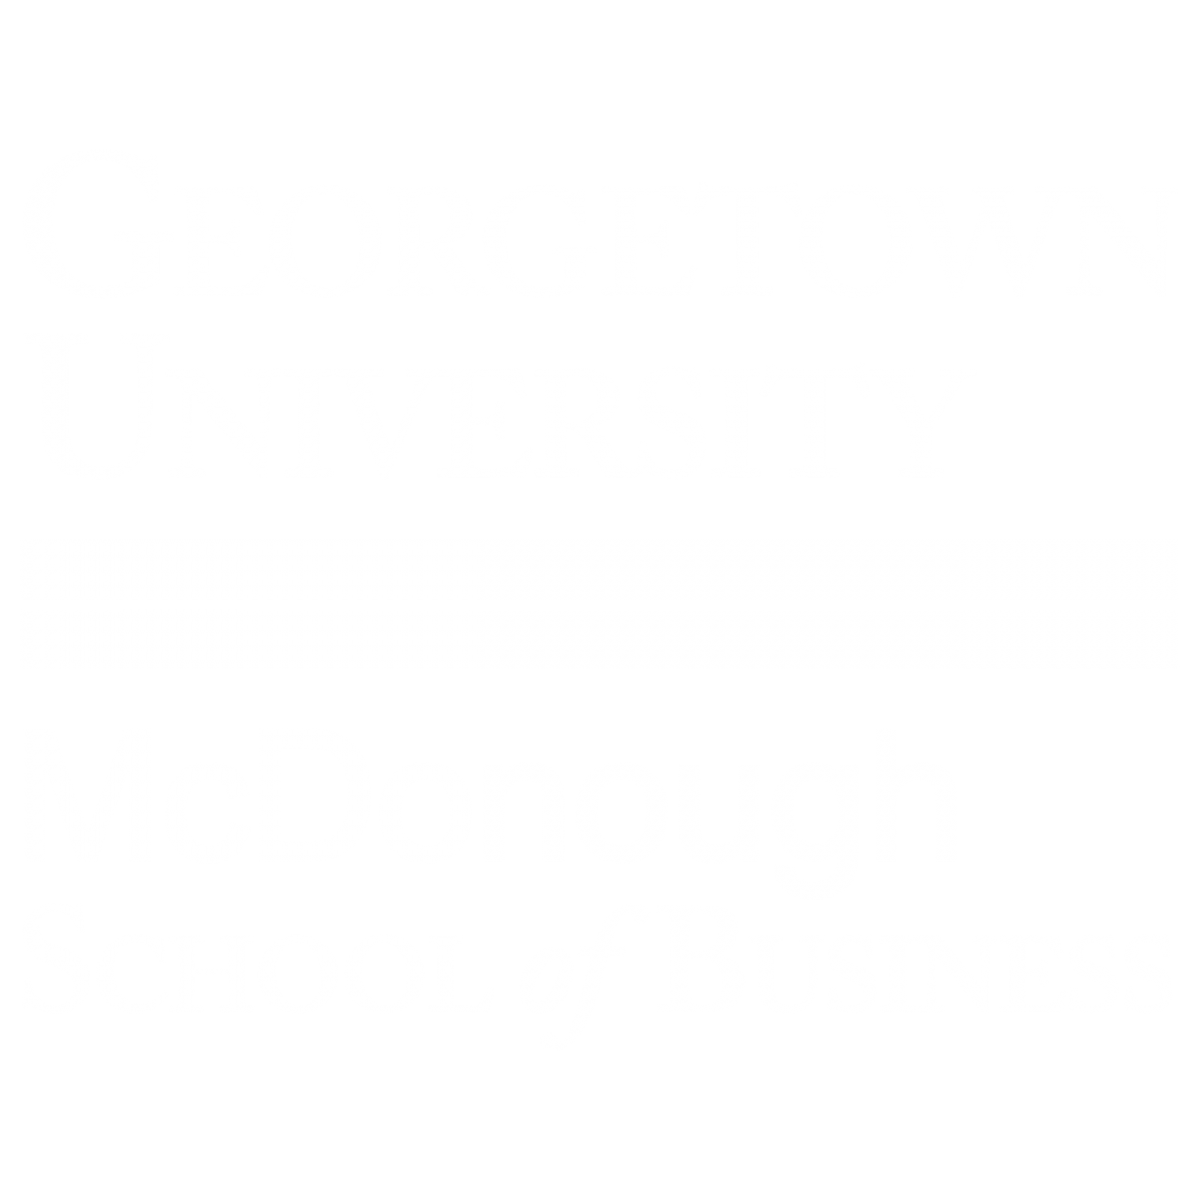 Official Business Logo - McDonough School of Business Logos, Style Guides, and Templates